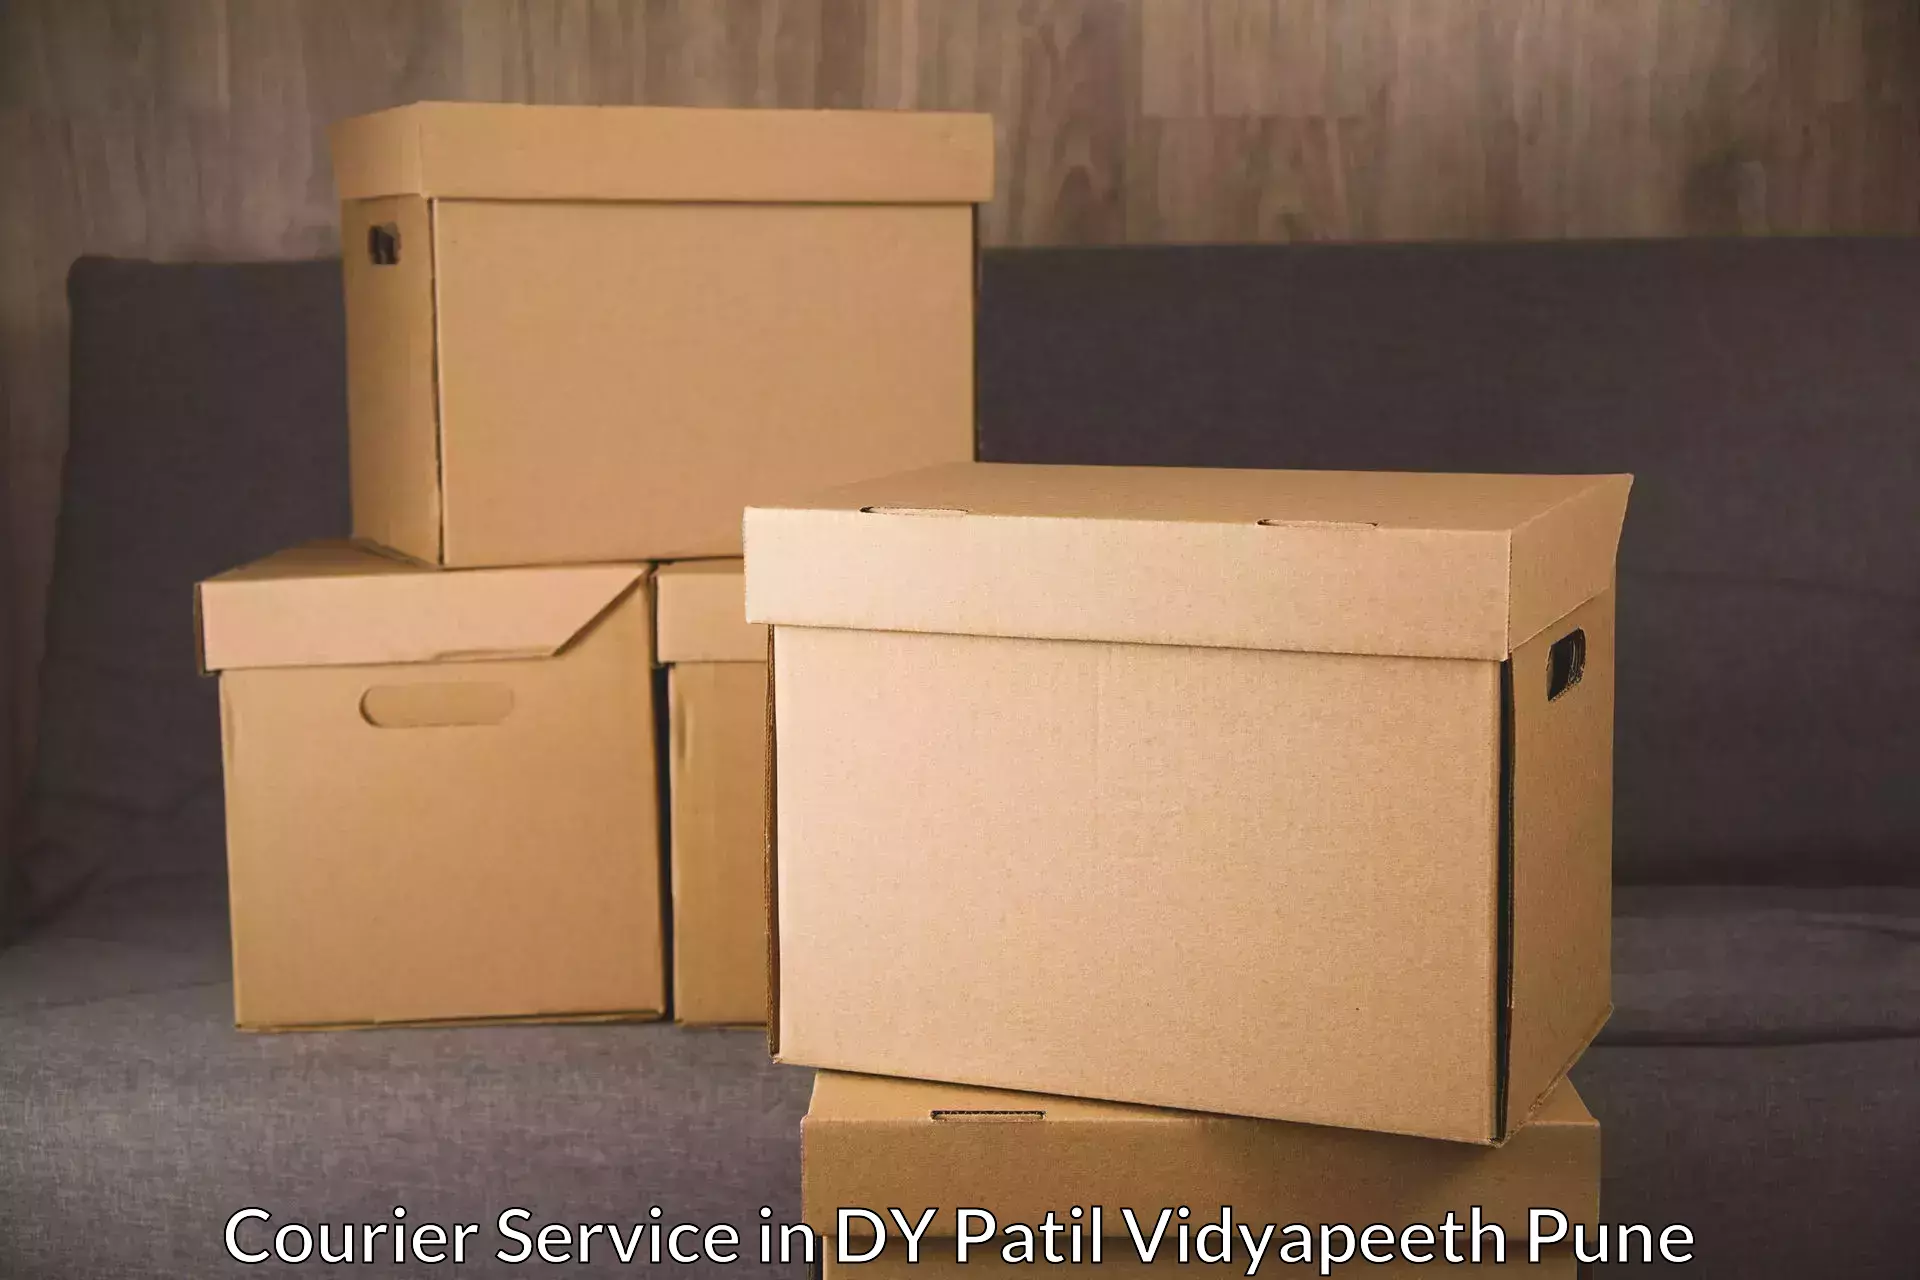 Customer-centric shipping in DY Patil Vidyapeeth Pune